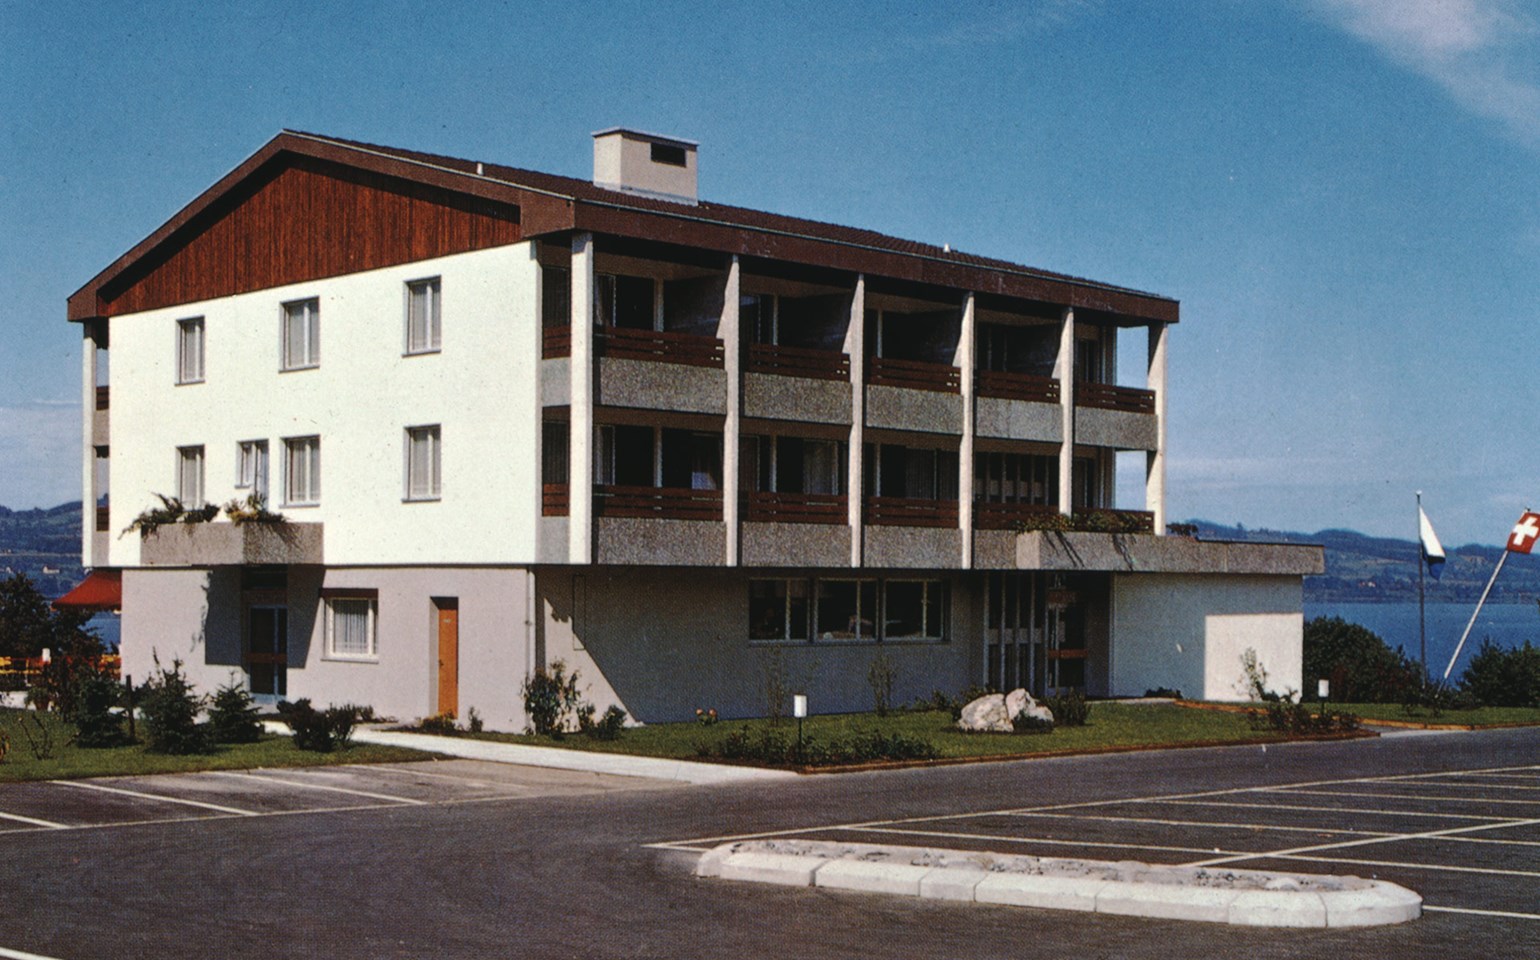 Historic picture of Sonne Seehotel Eich